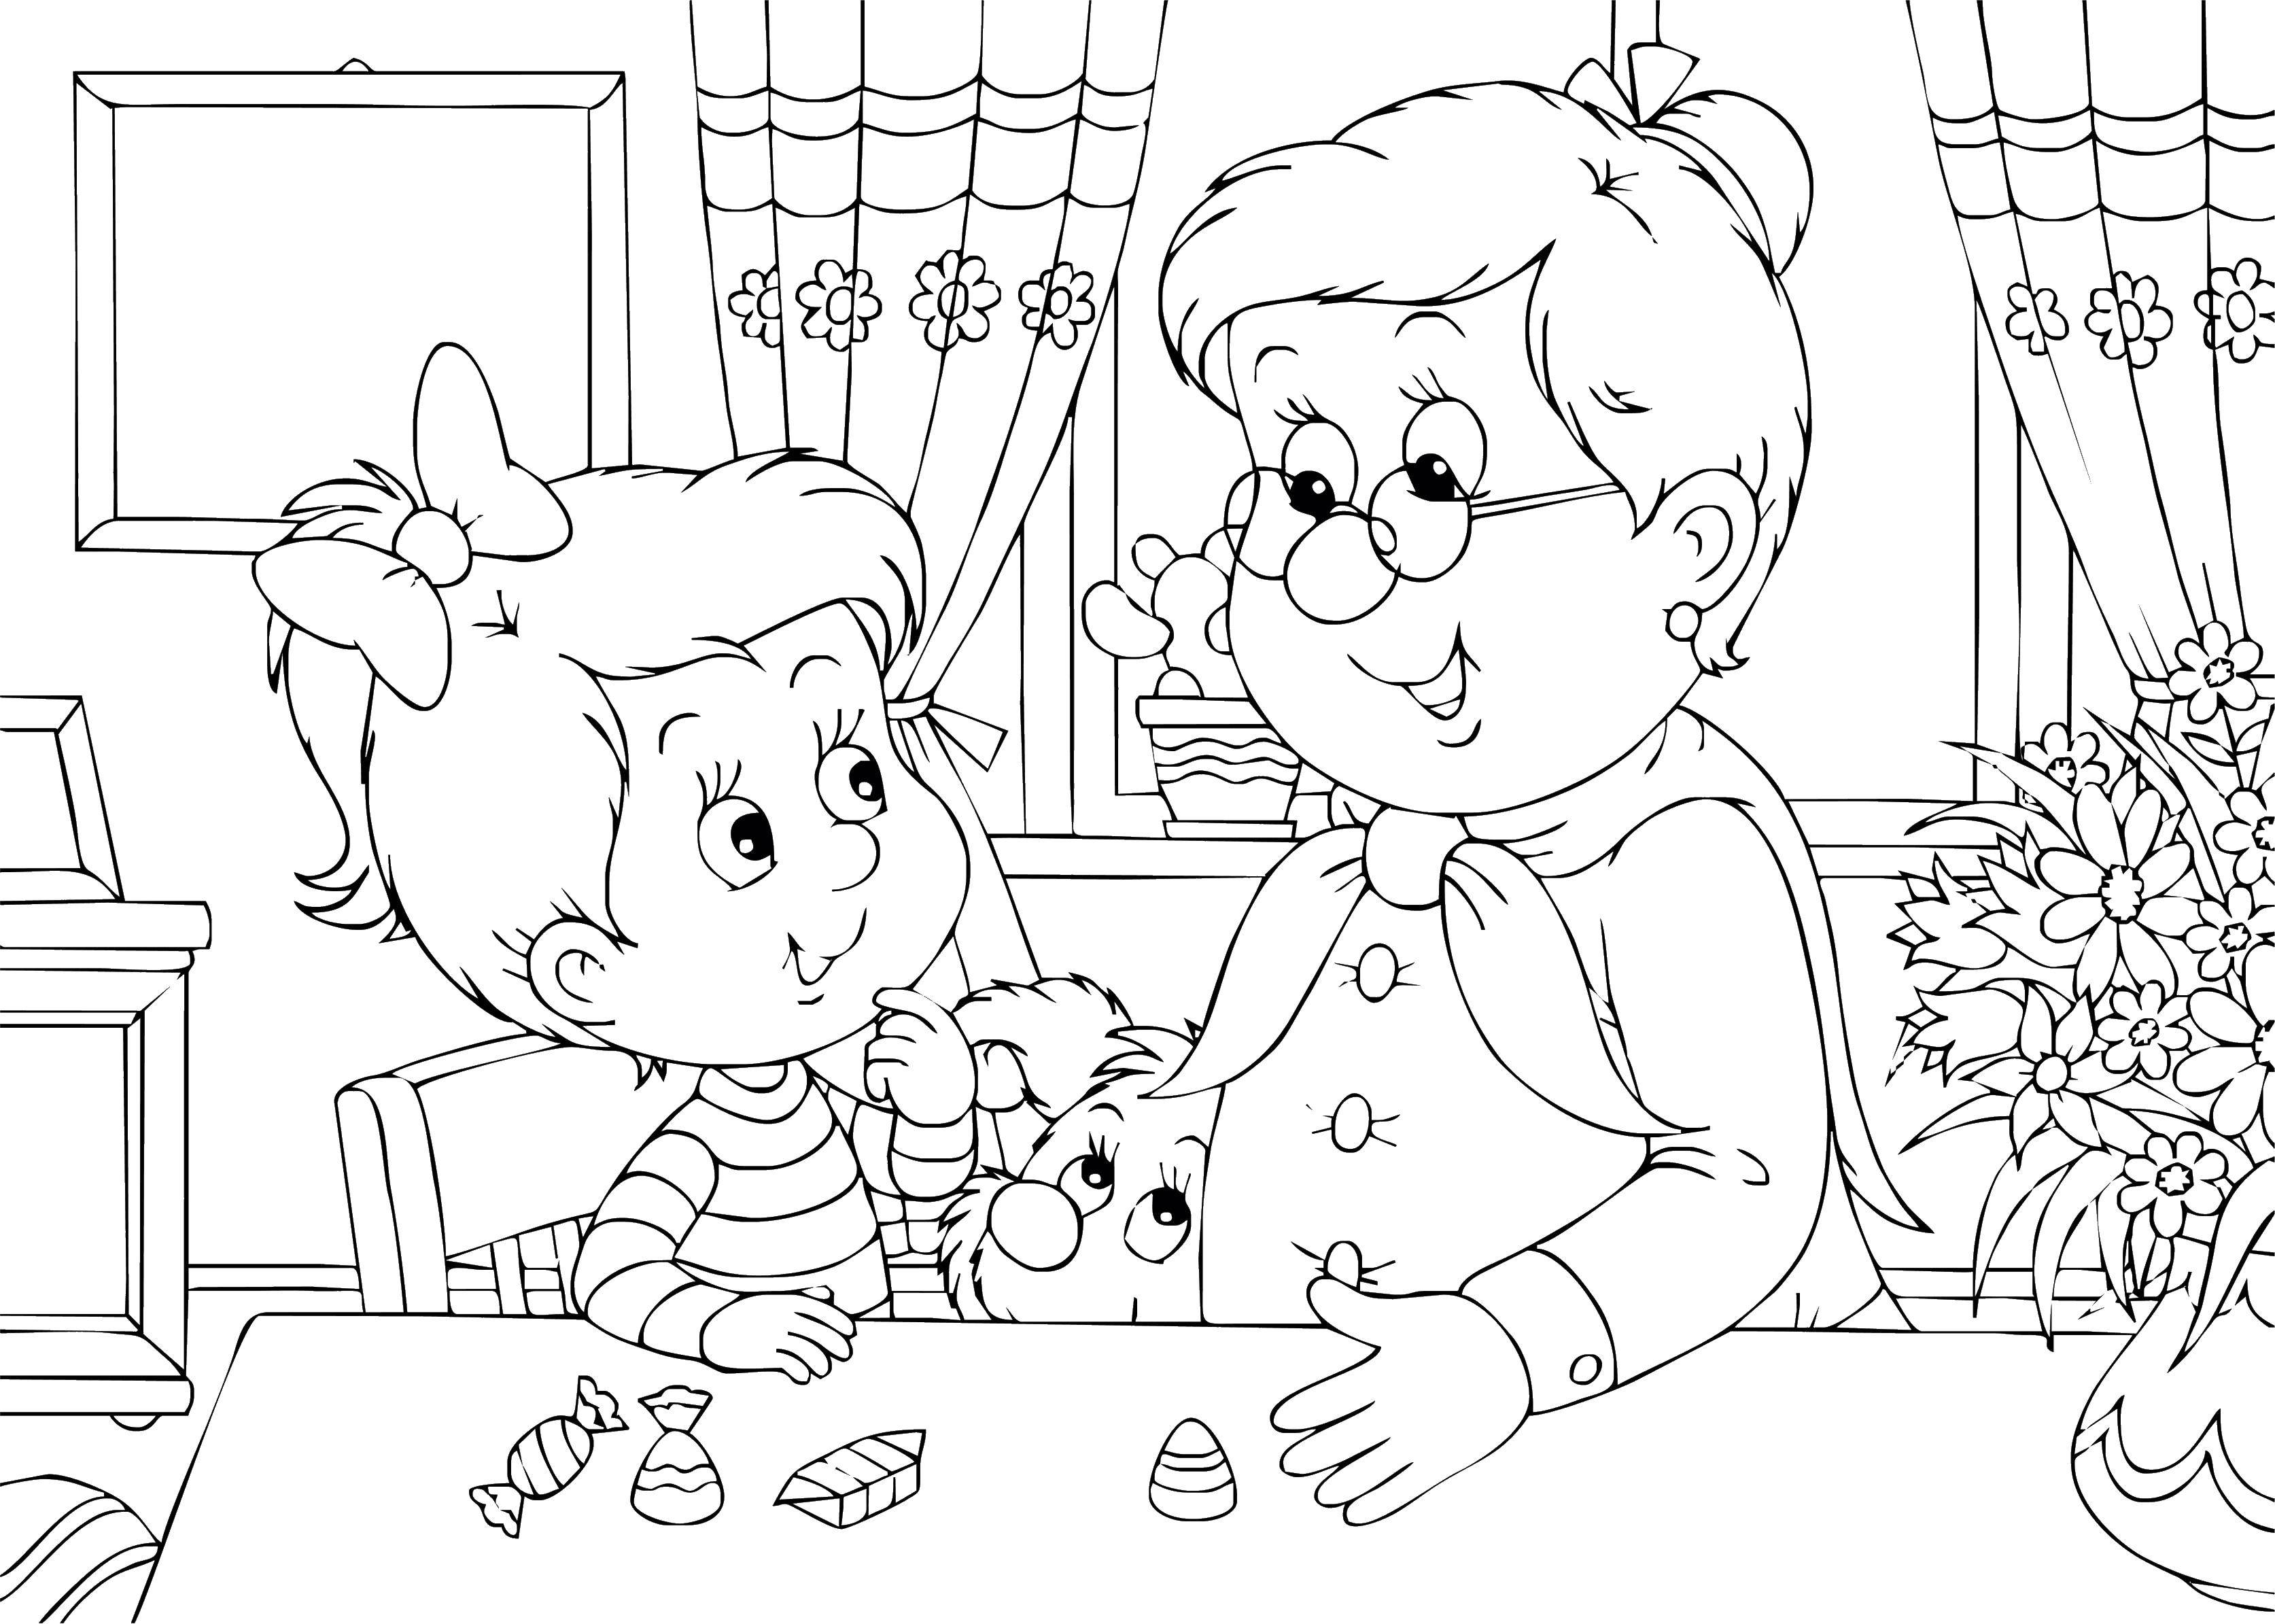 Coloring Grandmother with granddaughter. Category Coloring pages for kids. Tags:  grandmother, granddaughter.